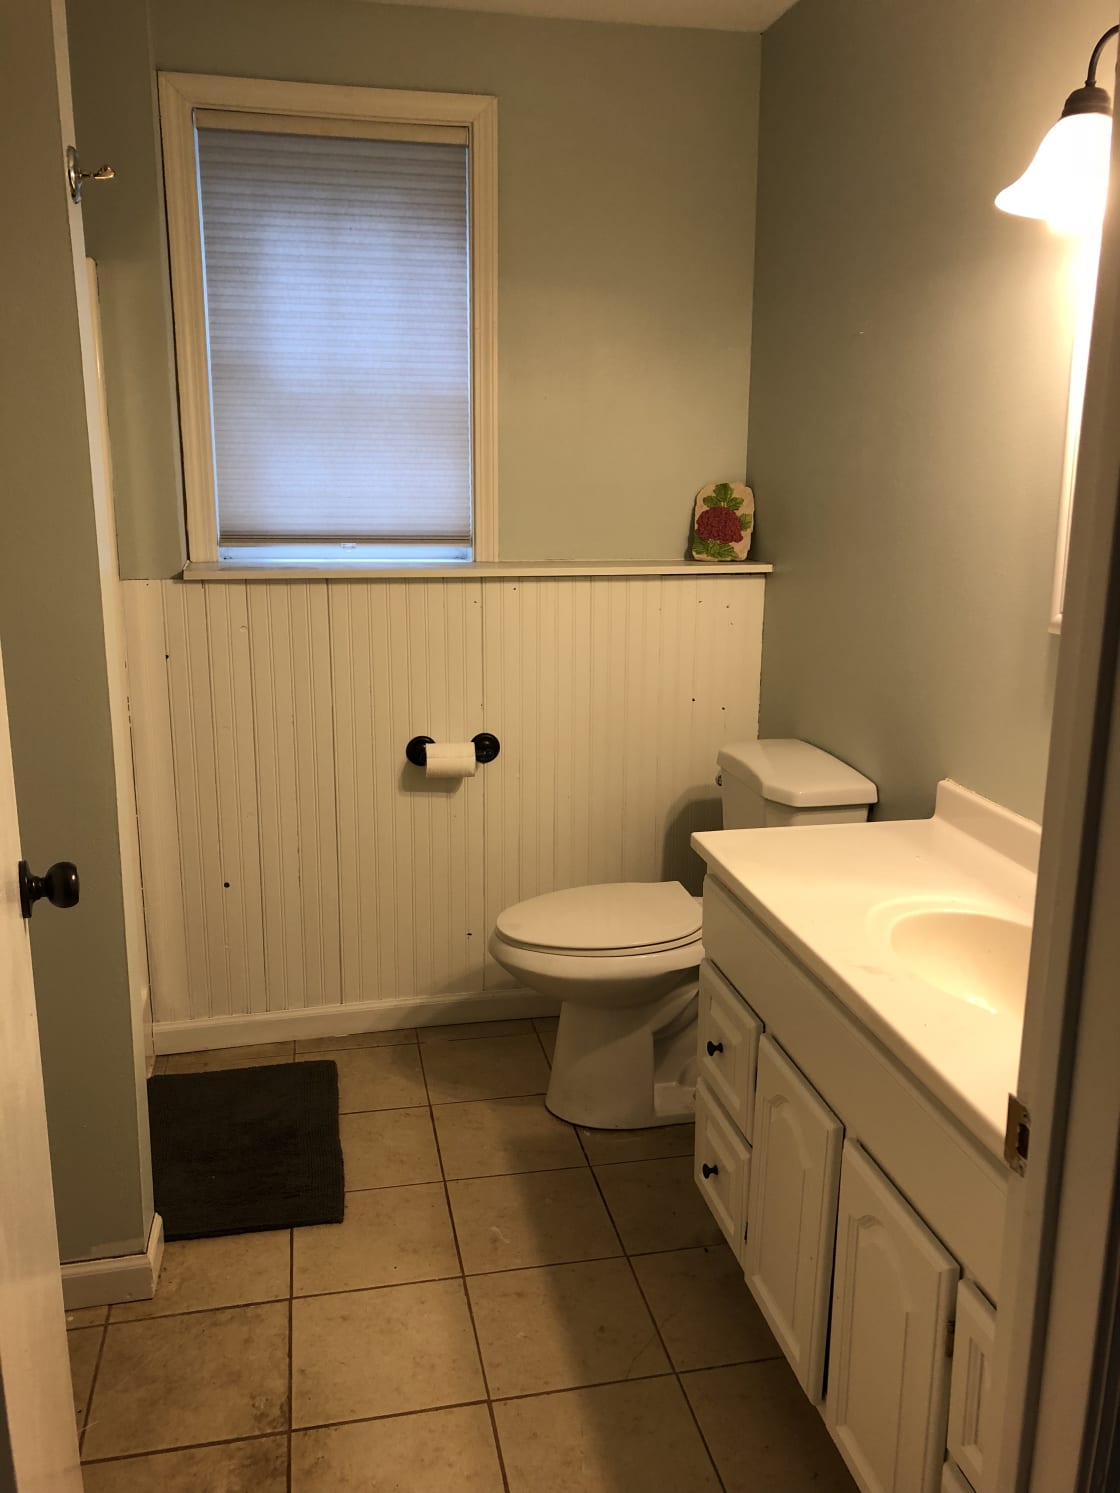 The guest bathroom 